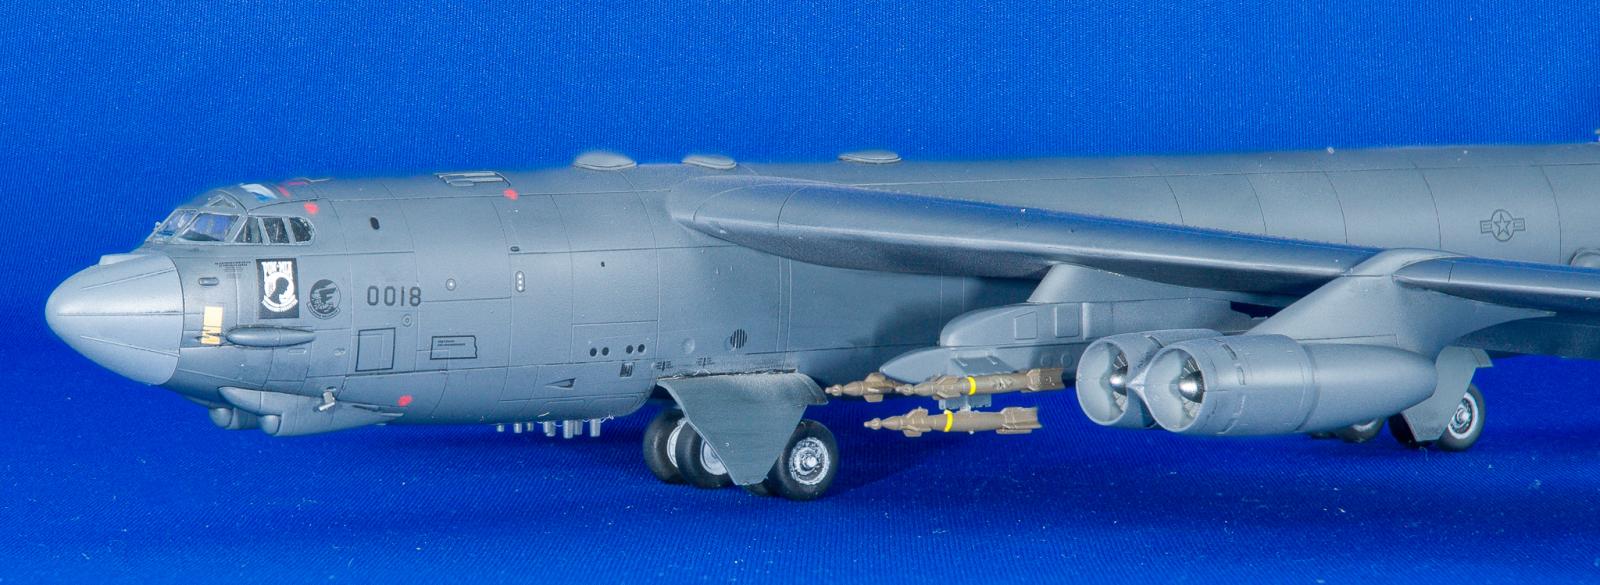 Details about   GreatWall L1008 1/144 B-52H STRATOFORTRESS STRATEHIC BOMBER  2020 Aircraft MODEL 